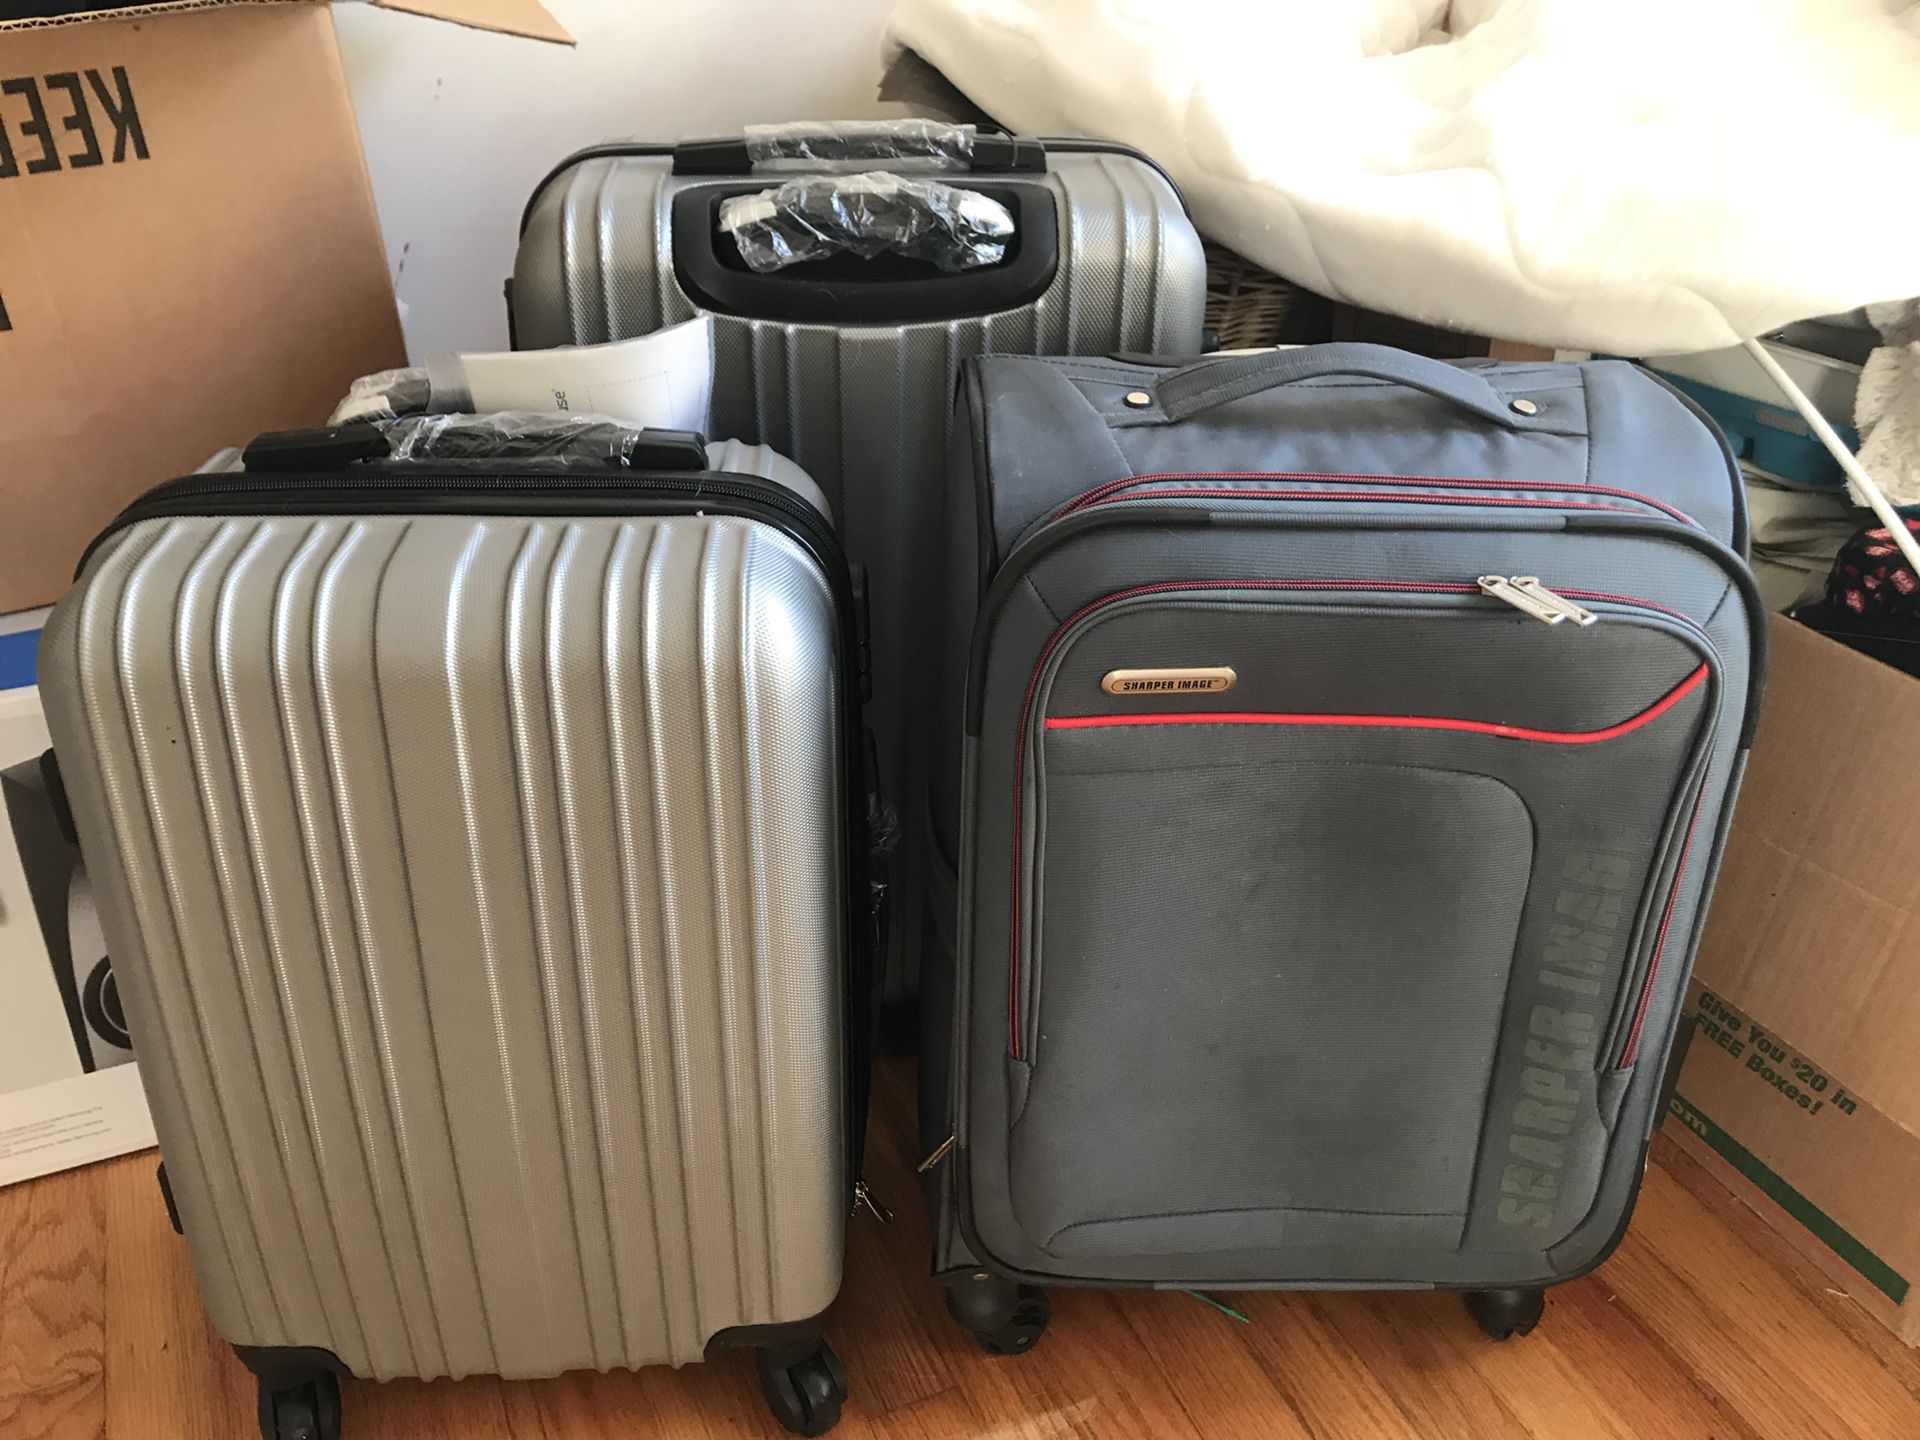 3 lightweight suitcases for sale